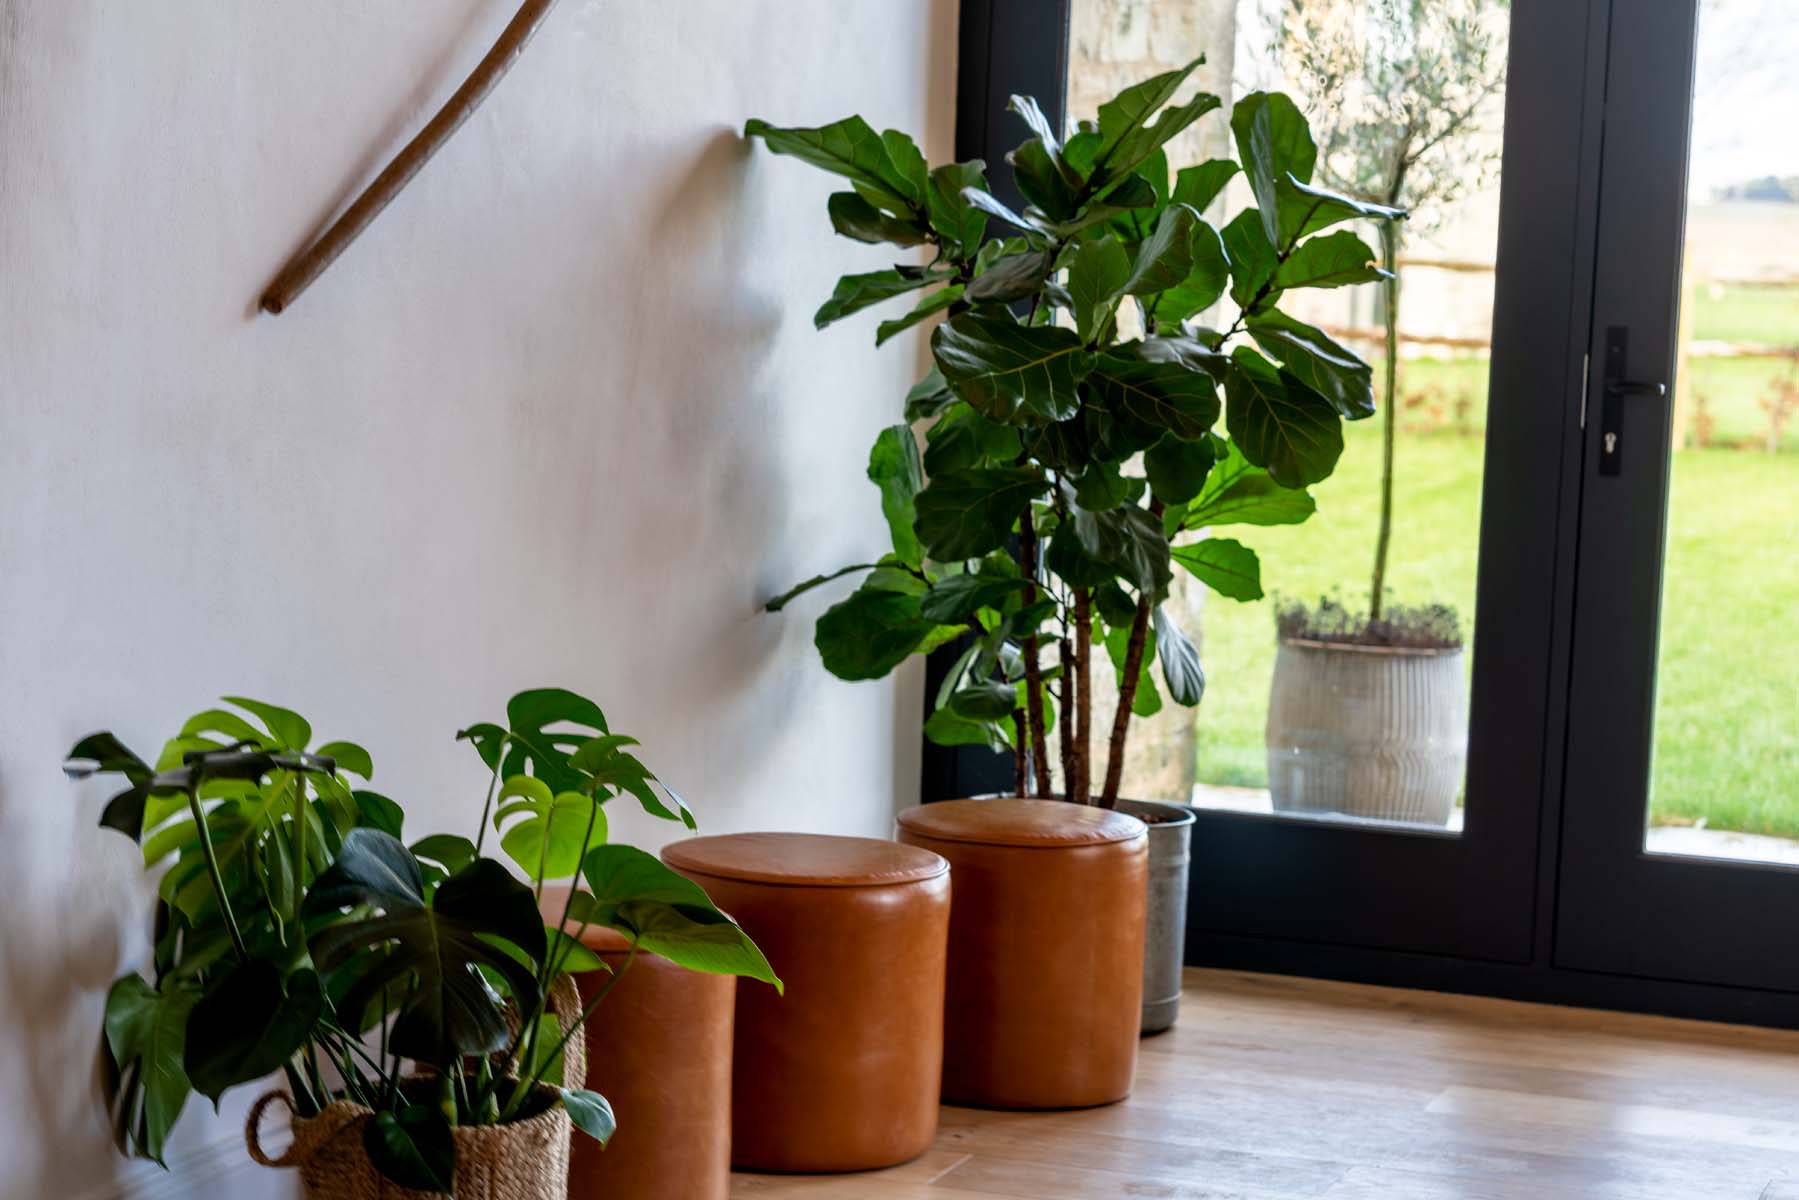 Plants and leather stools by a glass entrance